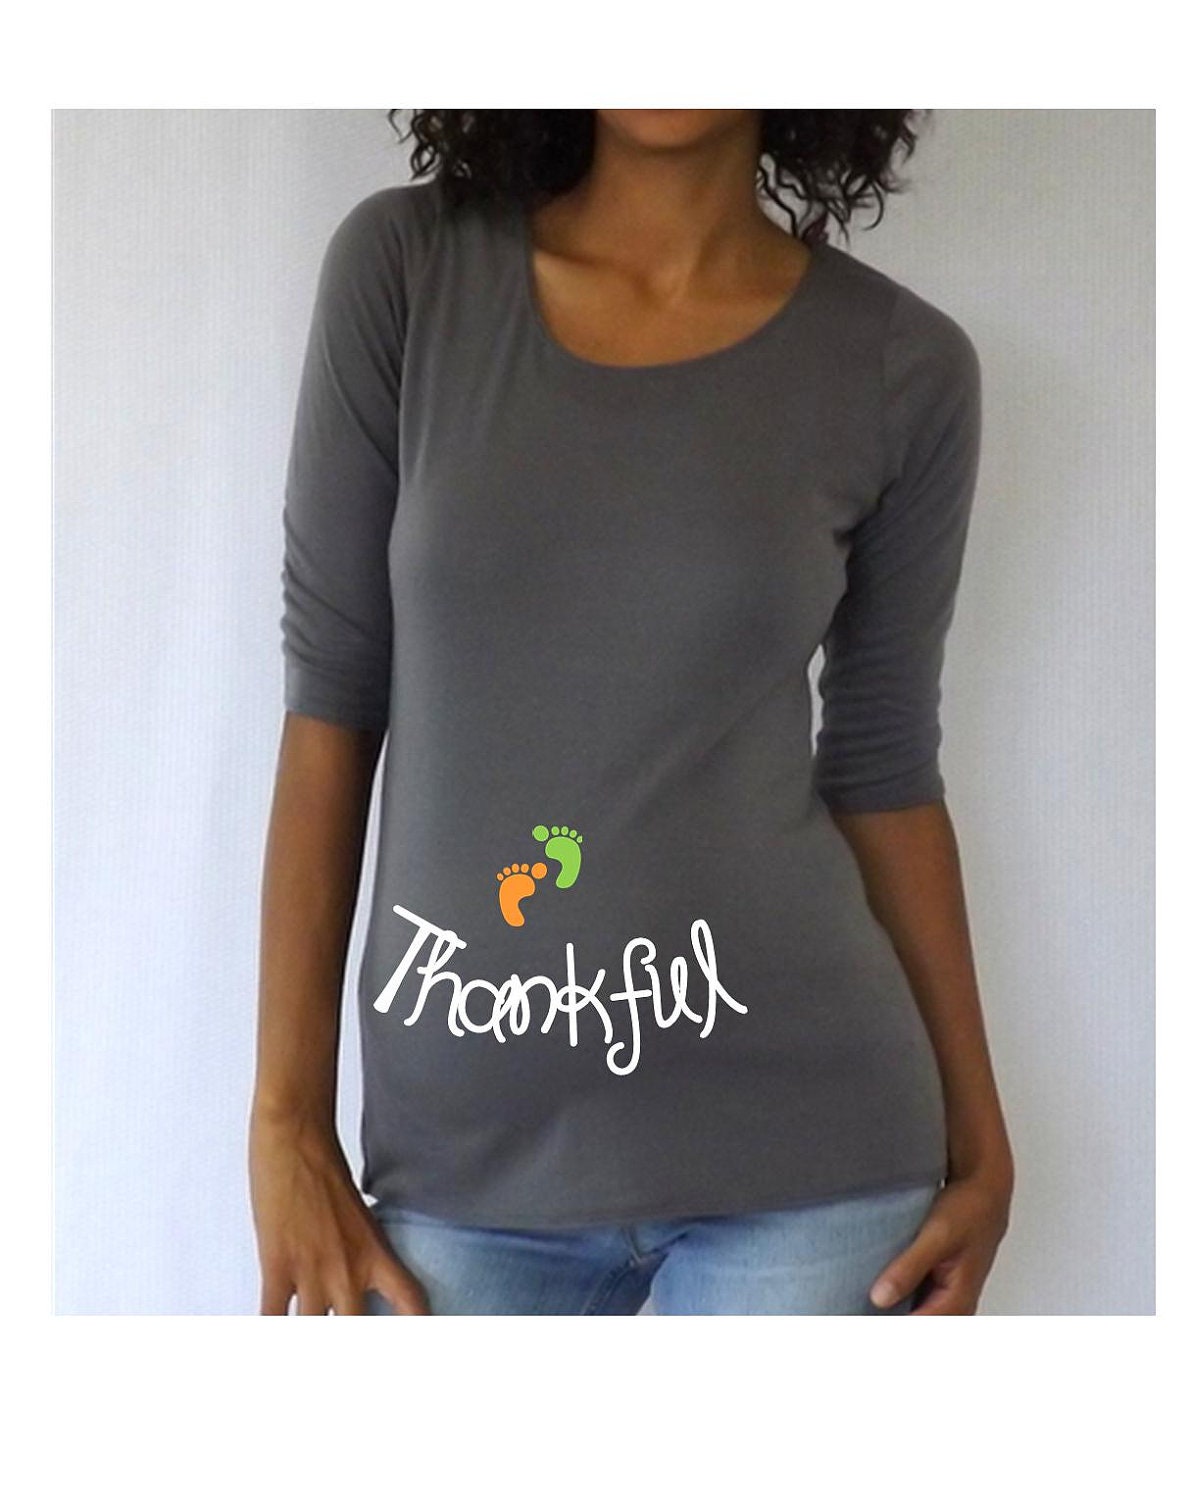 Gray  Thanksgiving Maternity Tshirt " Thankful"    3/4 sleeves Choose your Size S, M,L,XL